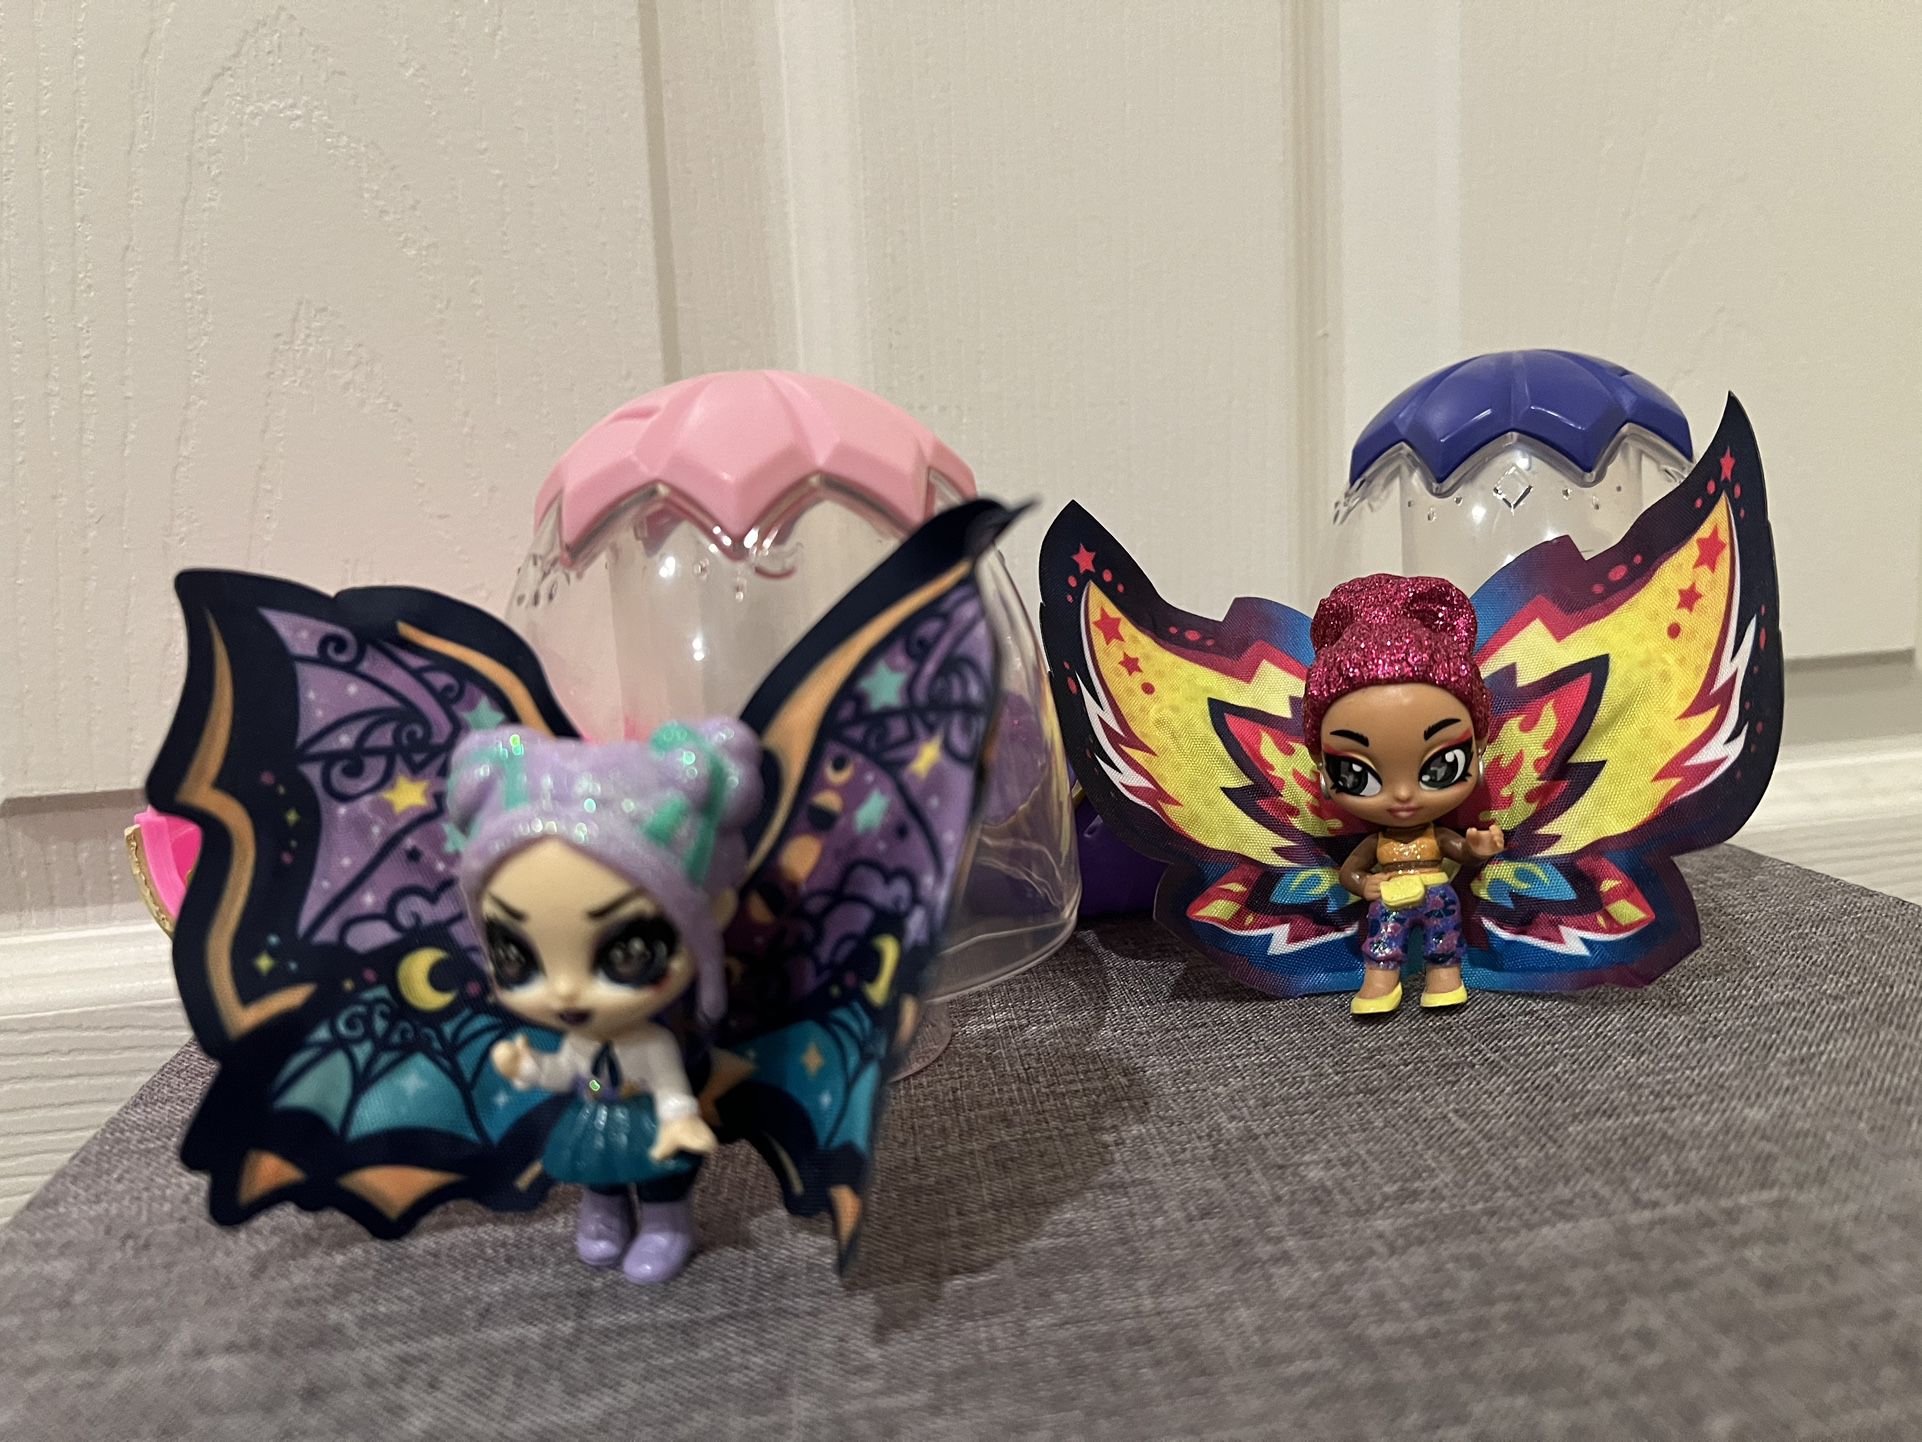 Hatchimals Pixies, Wilder Wings Pixie with Fabric Wings  (Qty 2) $10.00 OBO